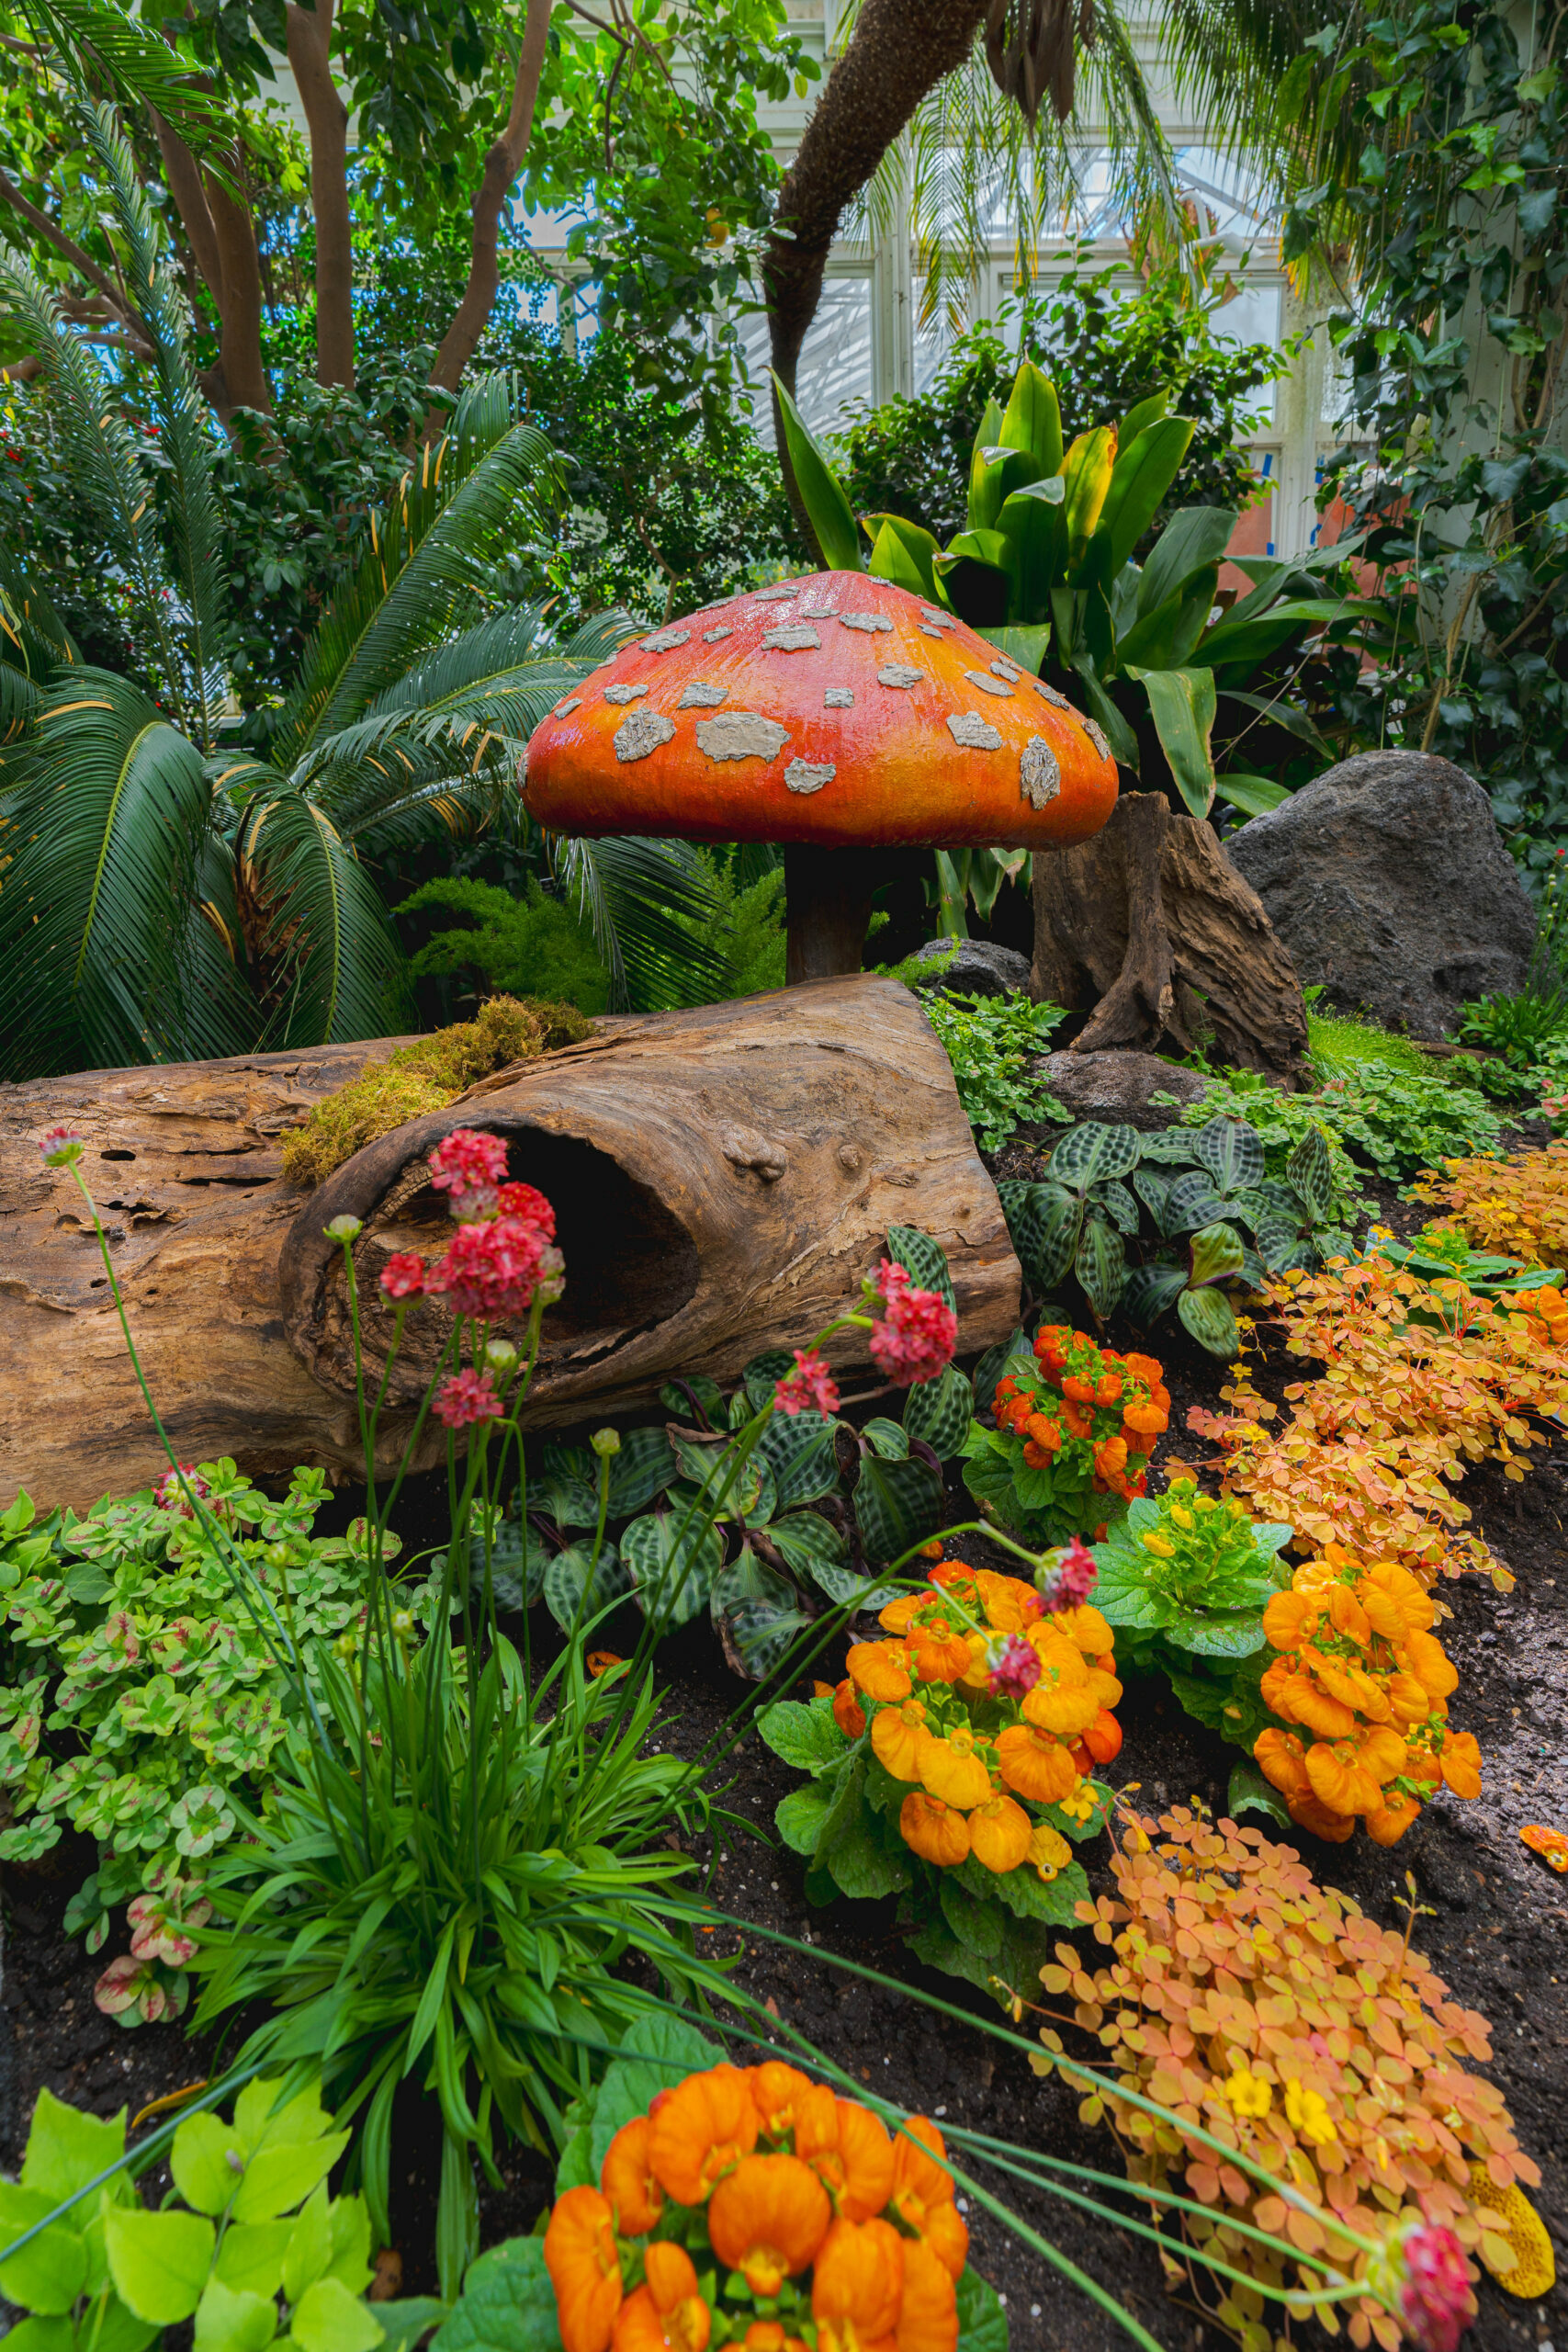 Colorful orange flowers with a mushroom sculpture.